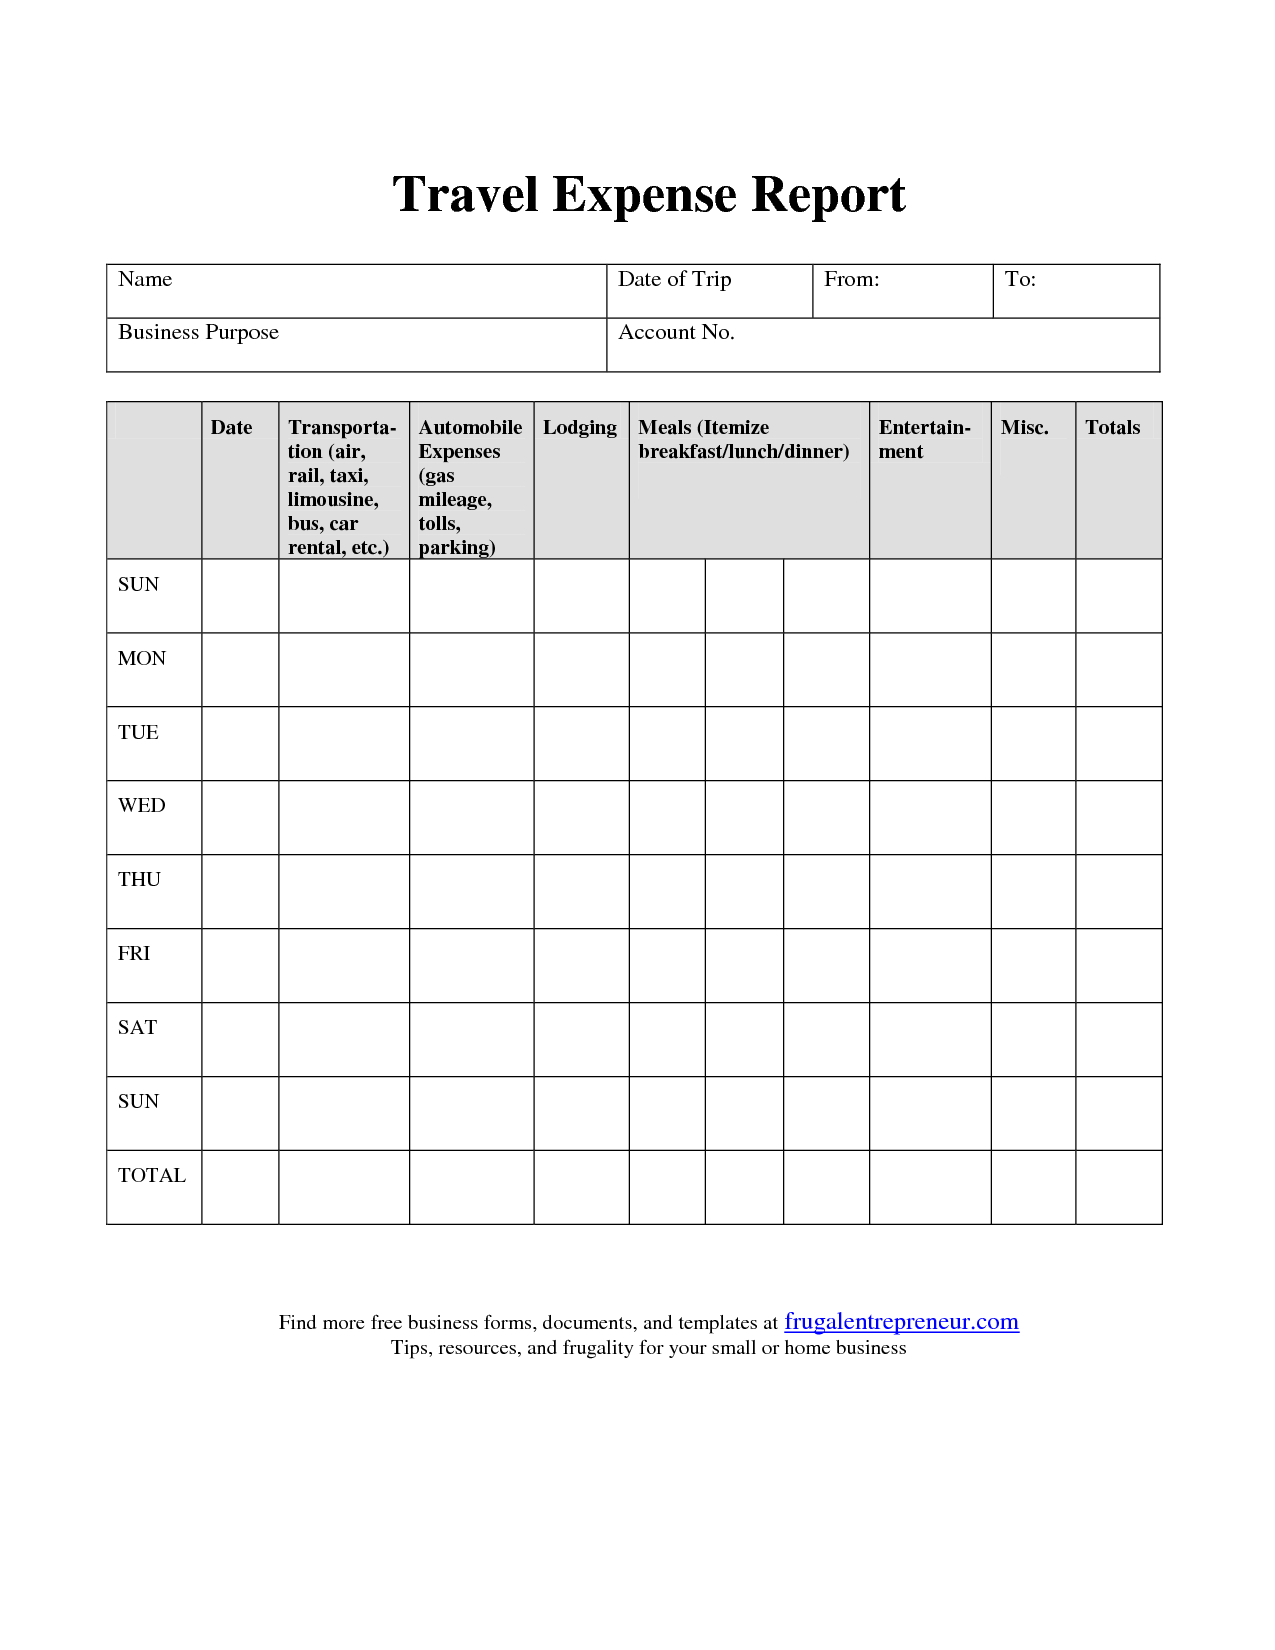 Expense Report Template Office Expense Report Spreadsheet Templates intended for Office Expense Report